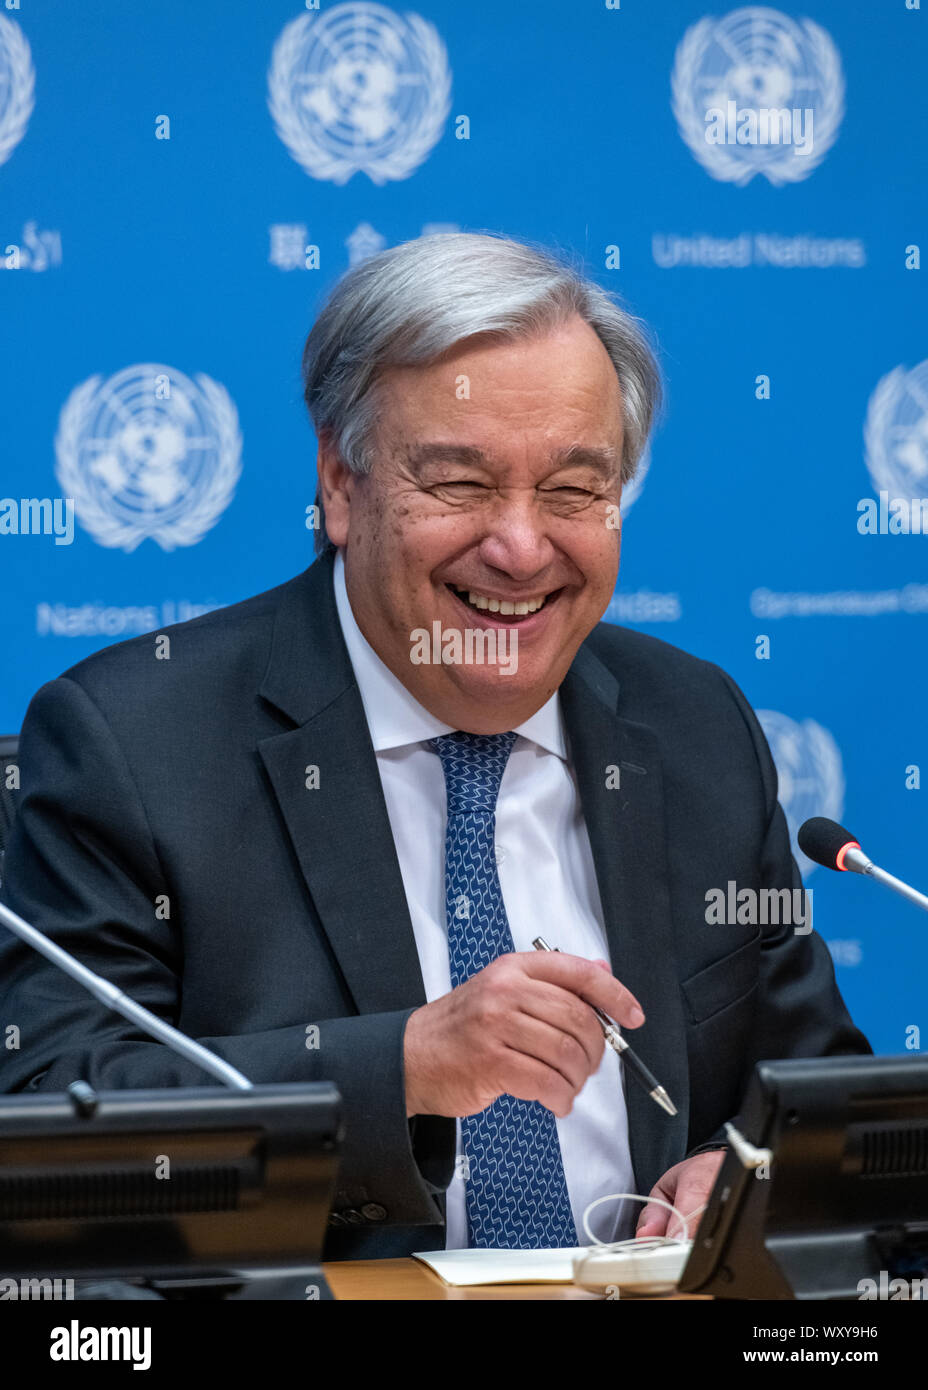 New York, USA,  18 September 2019.  United Nations Secretary-General Antonio Guterres smiles before the start of a news briefing to mark the opening of the 74th session of the UN General Assembly in New York City.   Credit: Enrique Shore/Alamy Live News Stock Photo